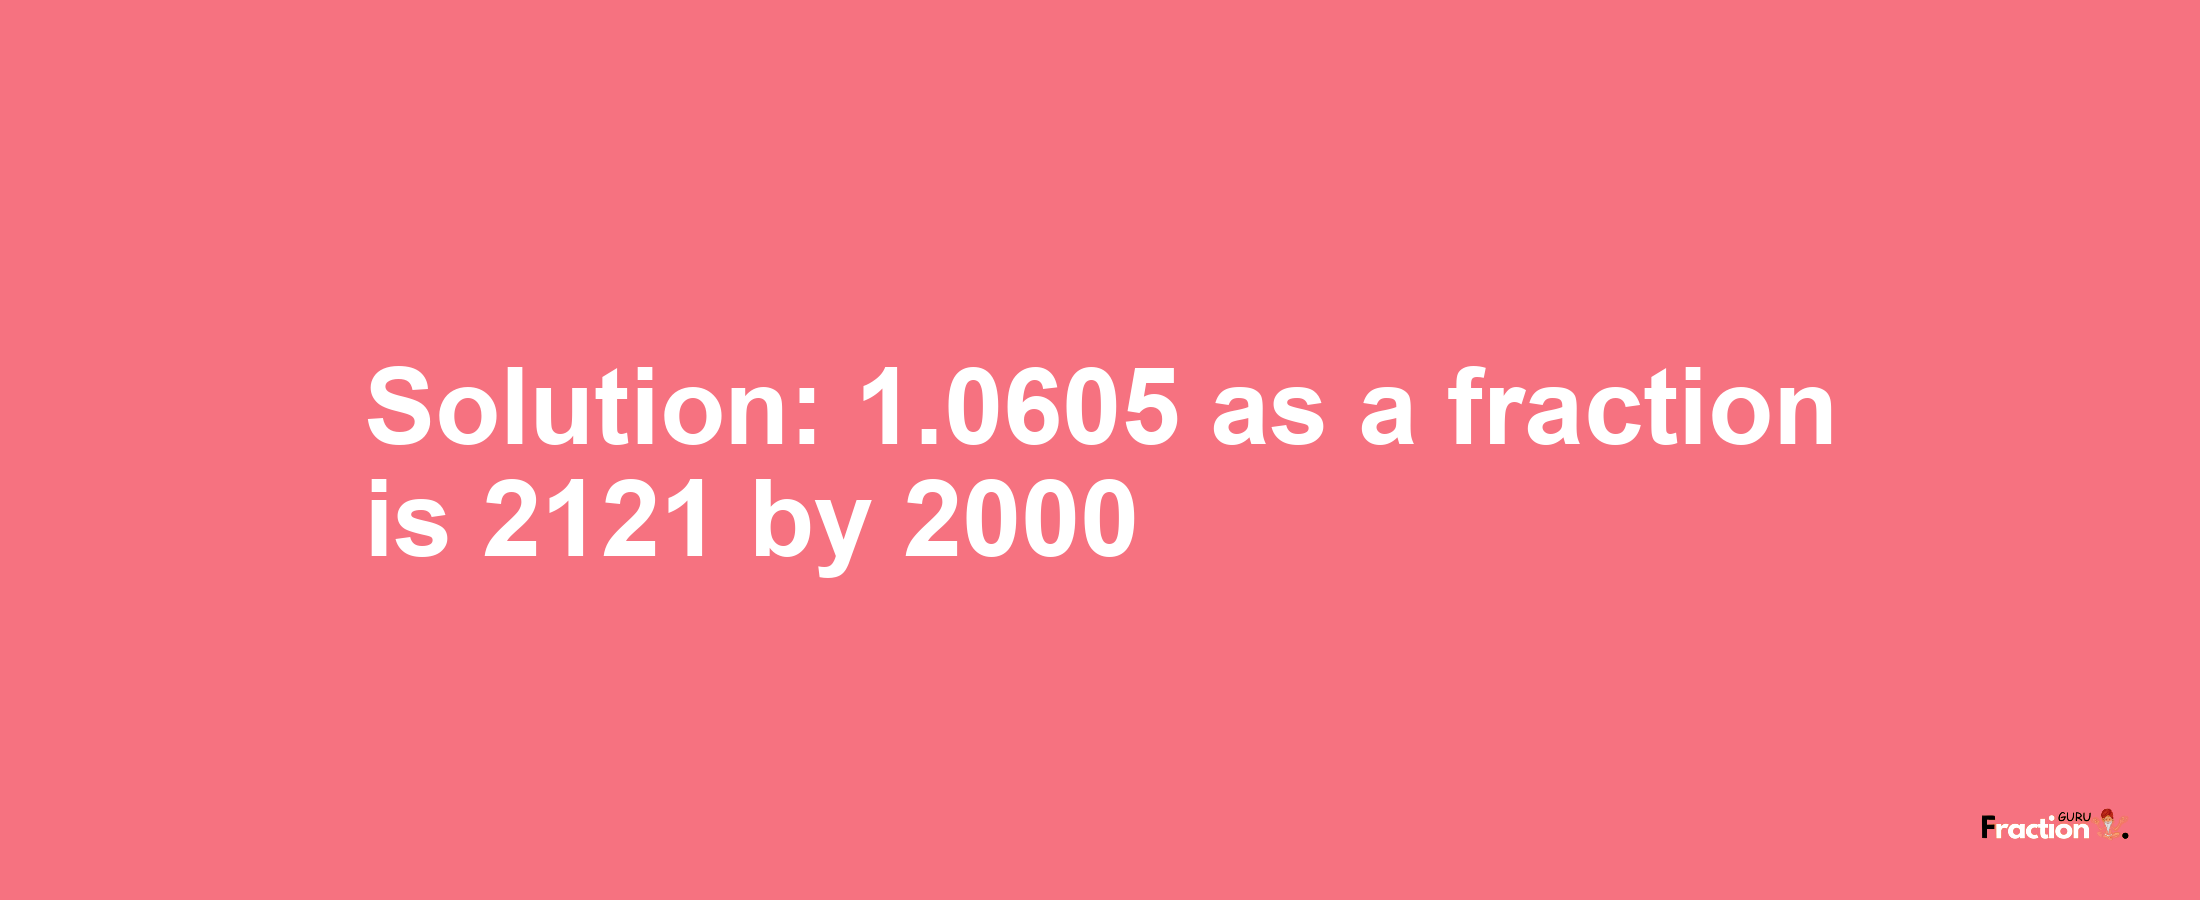 Solution:1.0605 as a fraction is 2121/2000